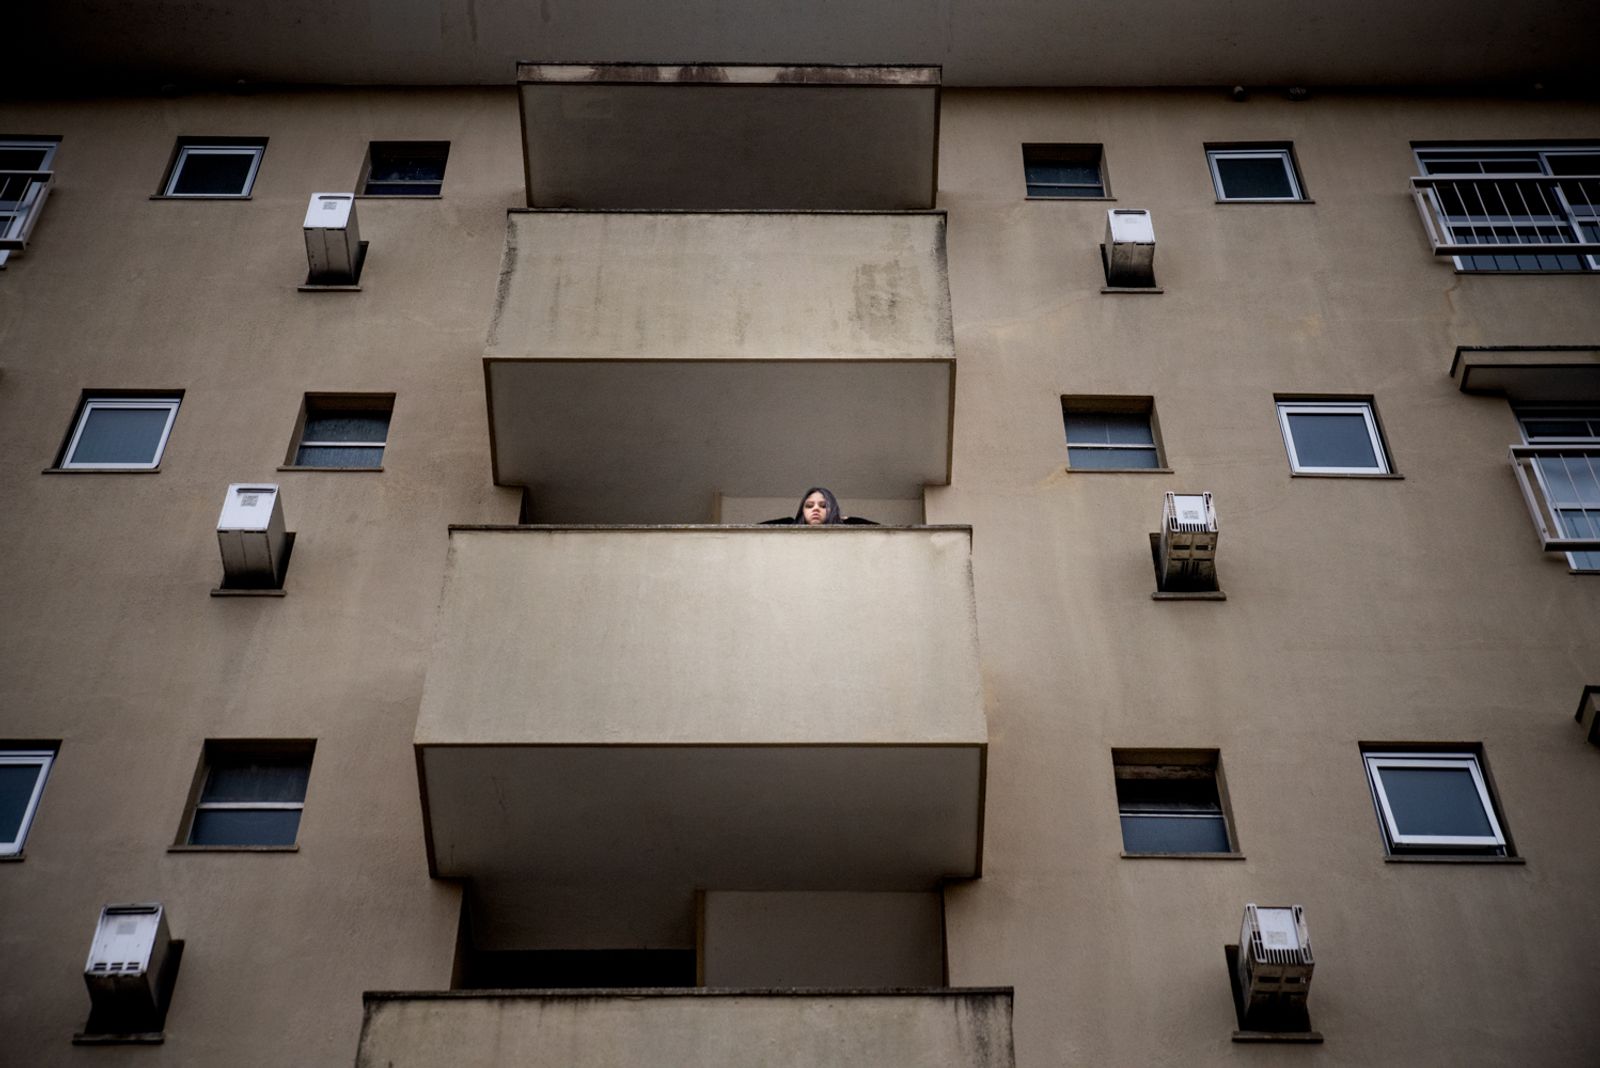 © hitomi hasegawa - Image from the Sunctuary of the housing complex photography project